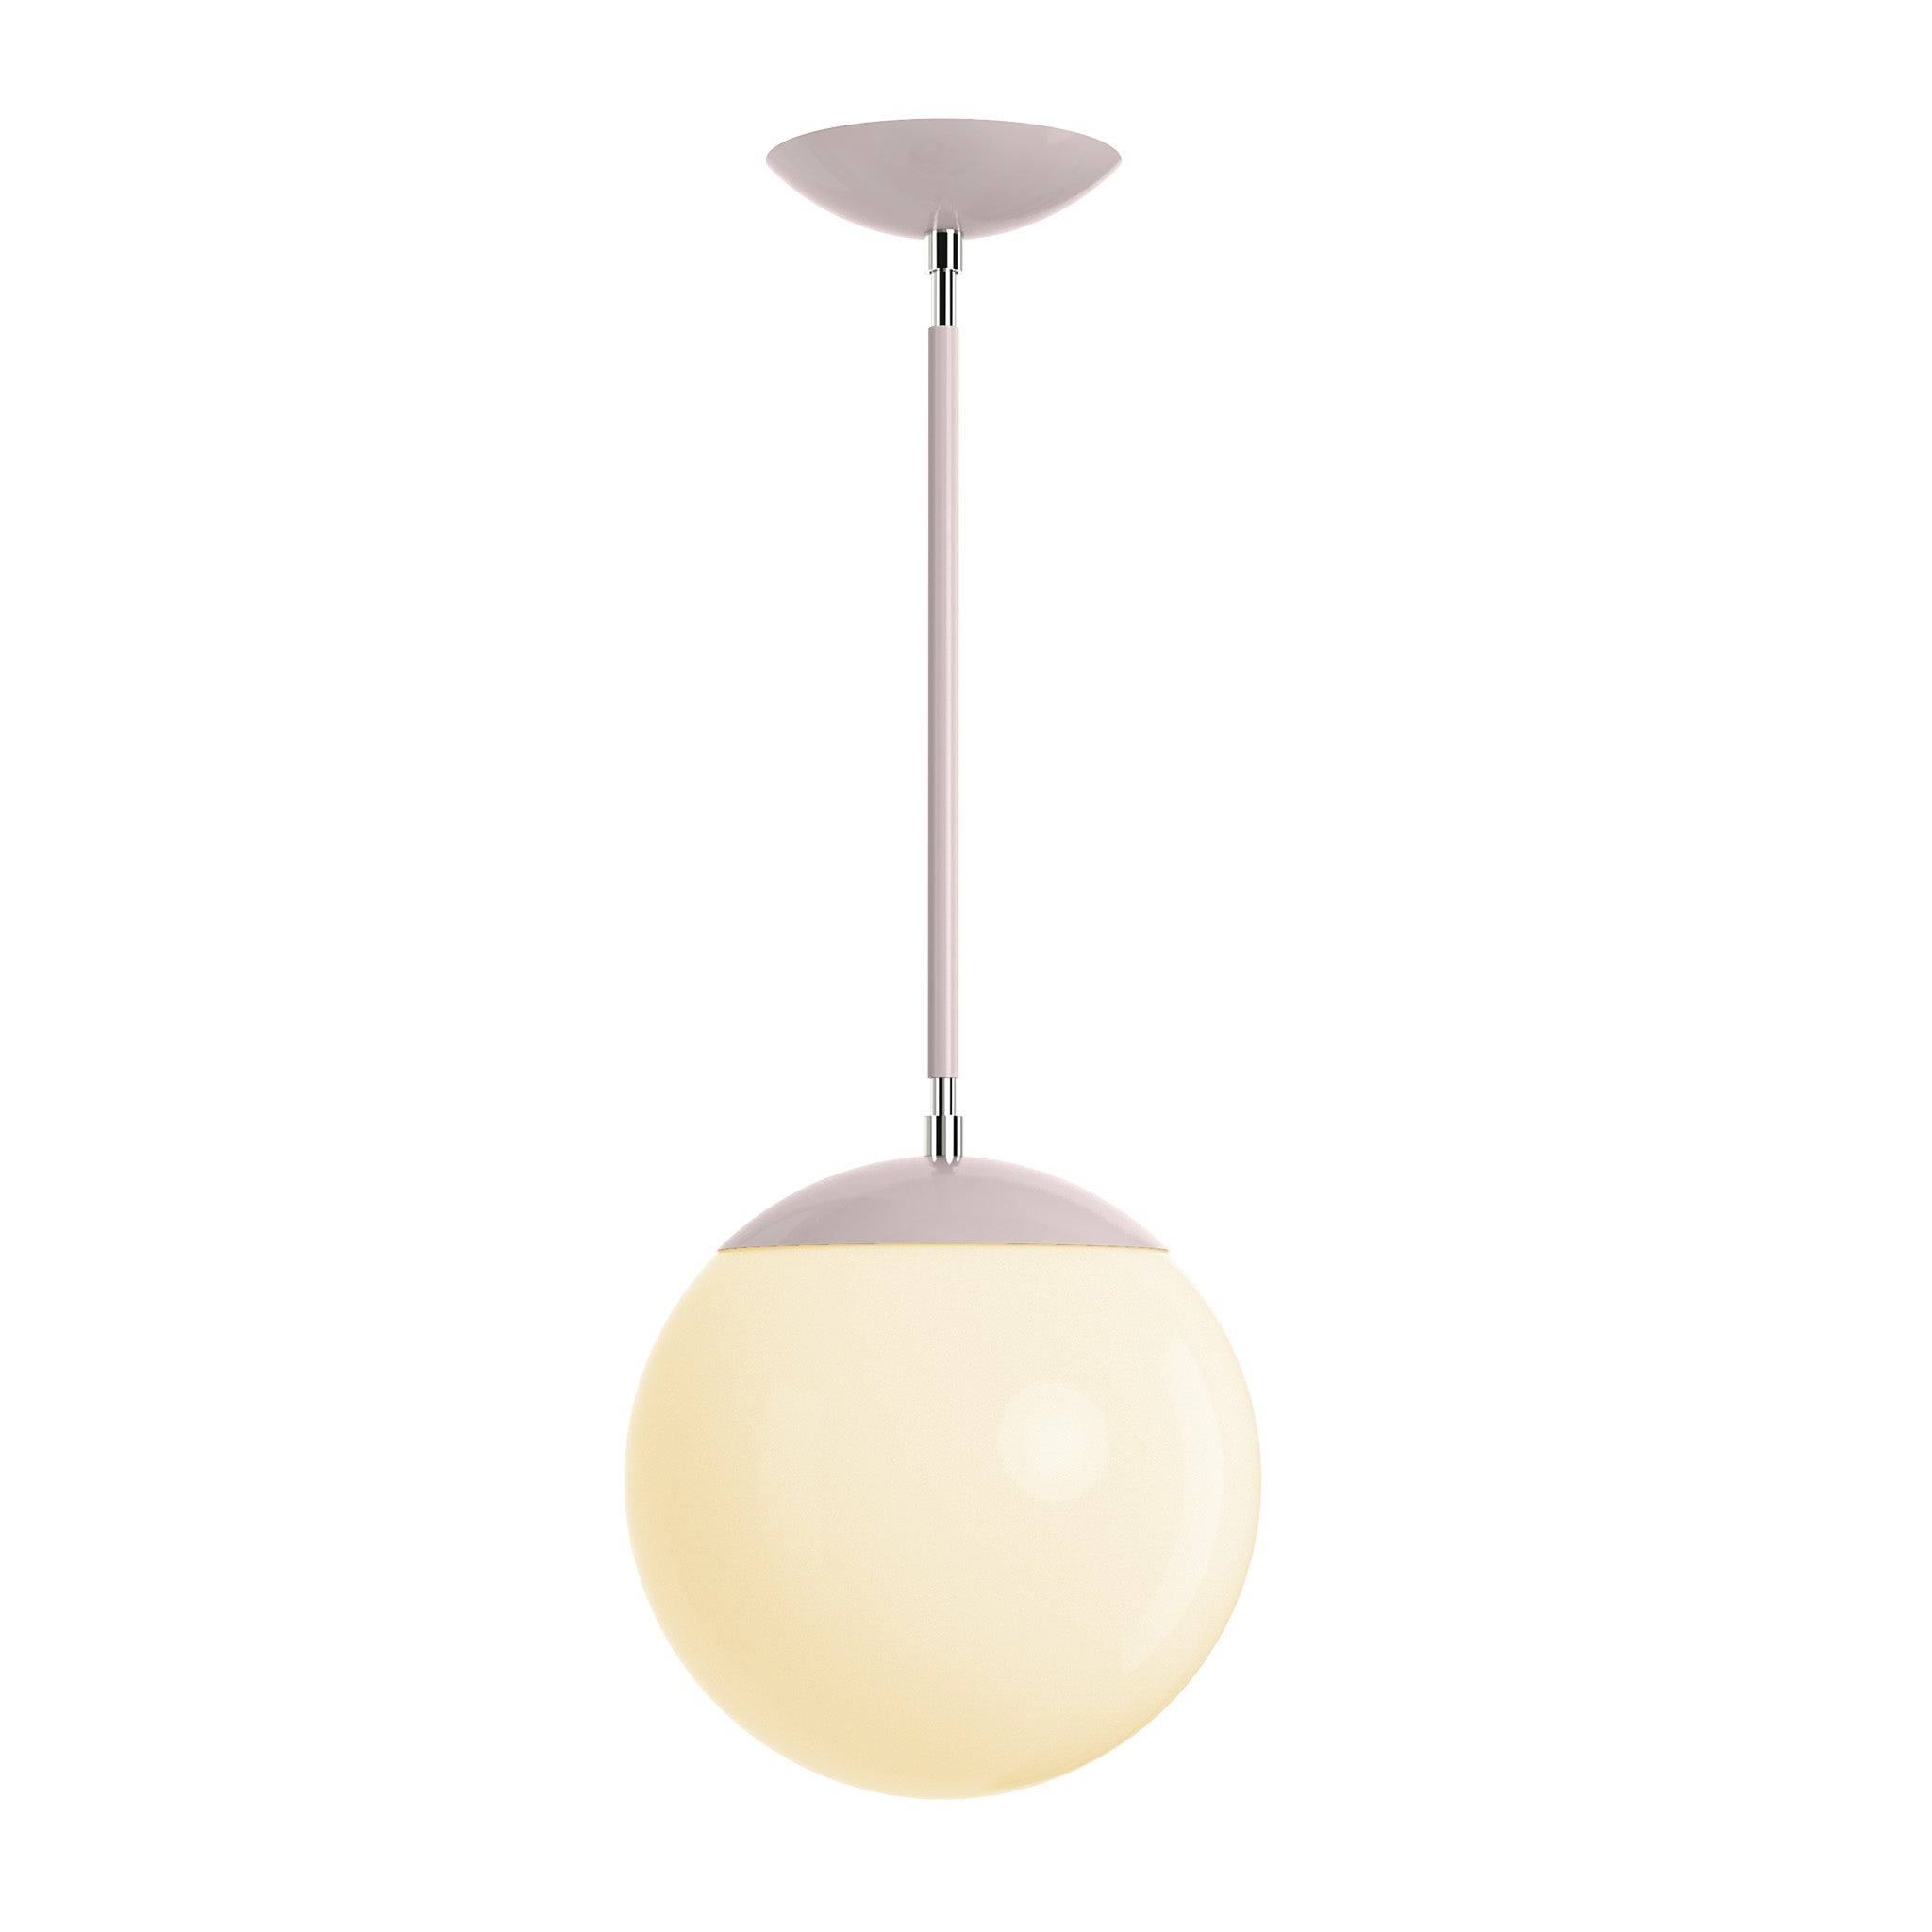 Polished nickel and barely cap globe pendant 10" dutton brown lighting